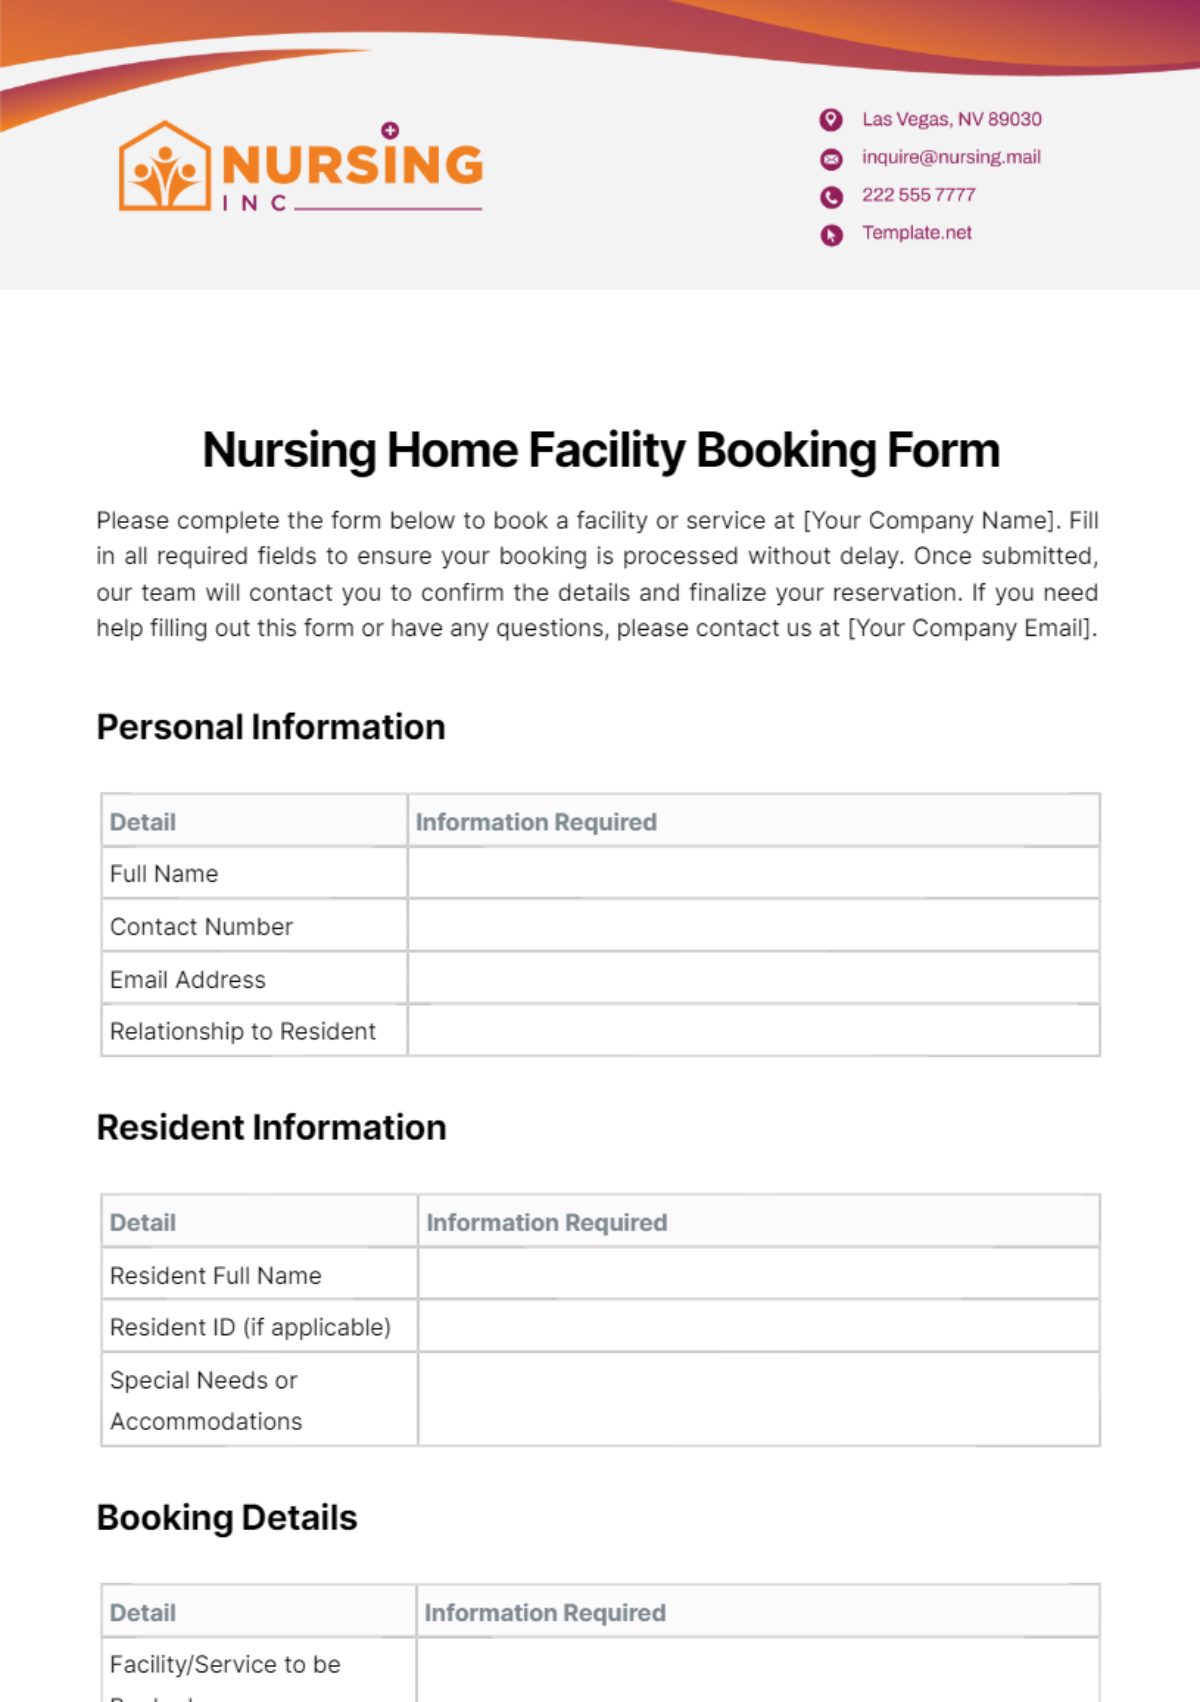 Nursing Home Facility Booking Form Template